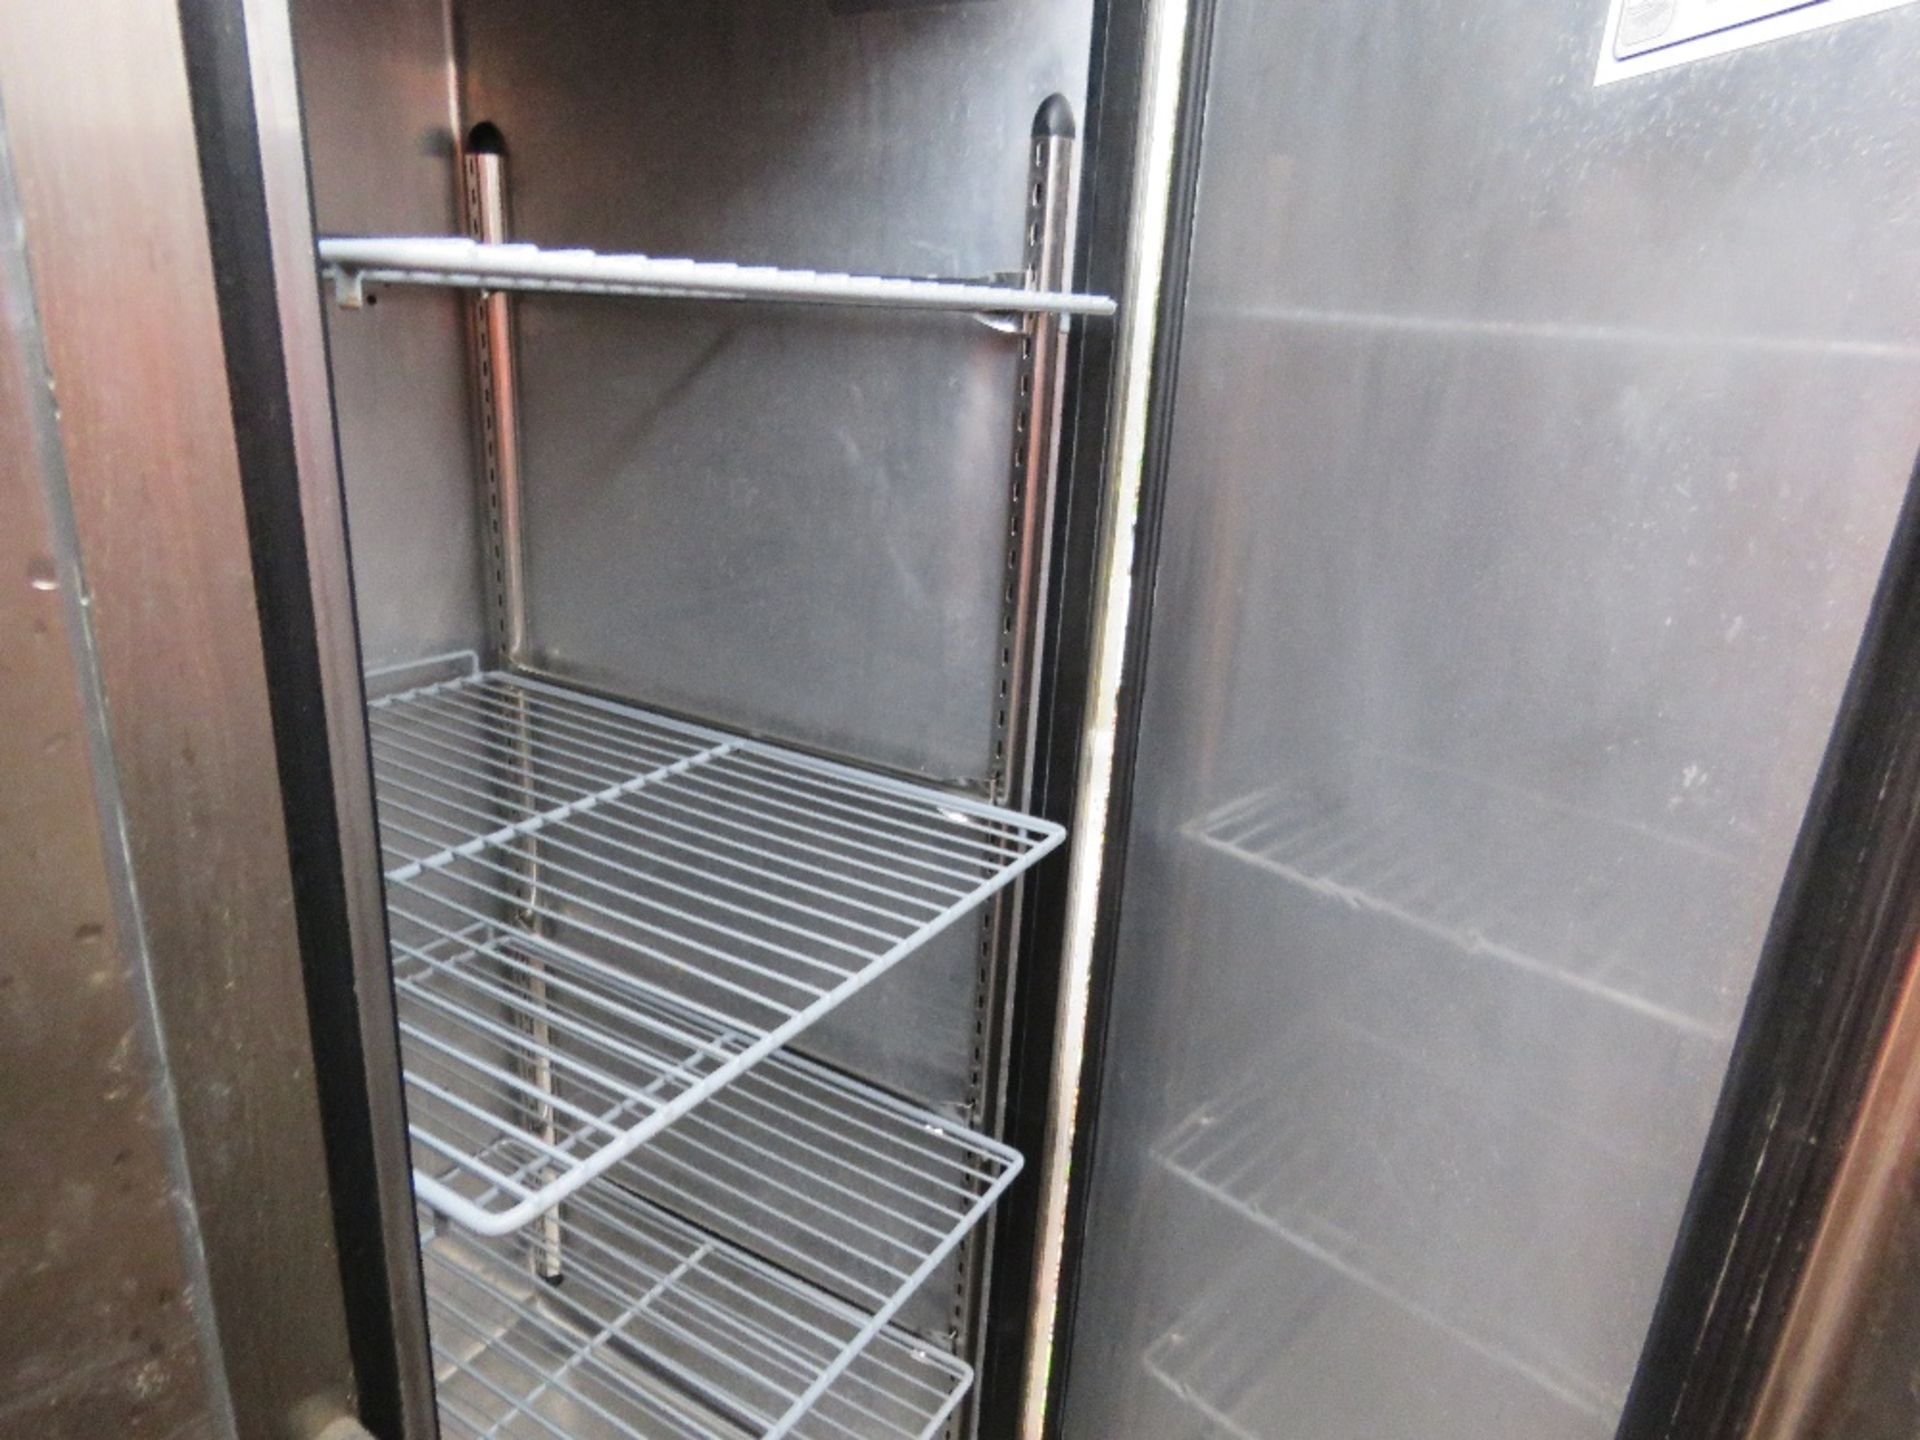 2 X LARGE CAPACITY CATERING FRIDGES DIRECT FROM CAFE SITE RE-DEVELOPMENT. WORKING WHEN RECENTLY REM - Image 5 of 6